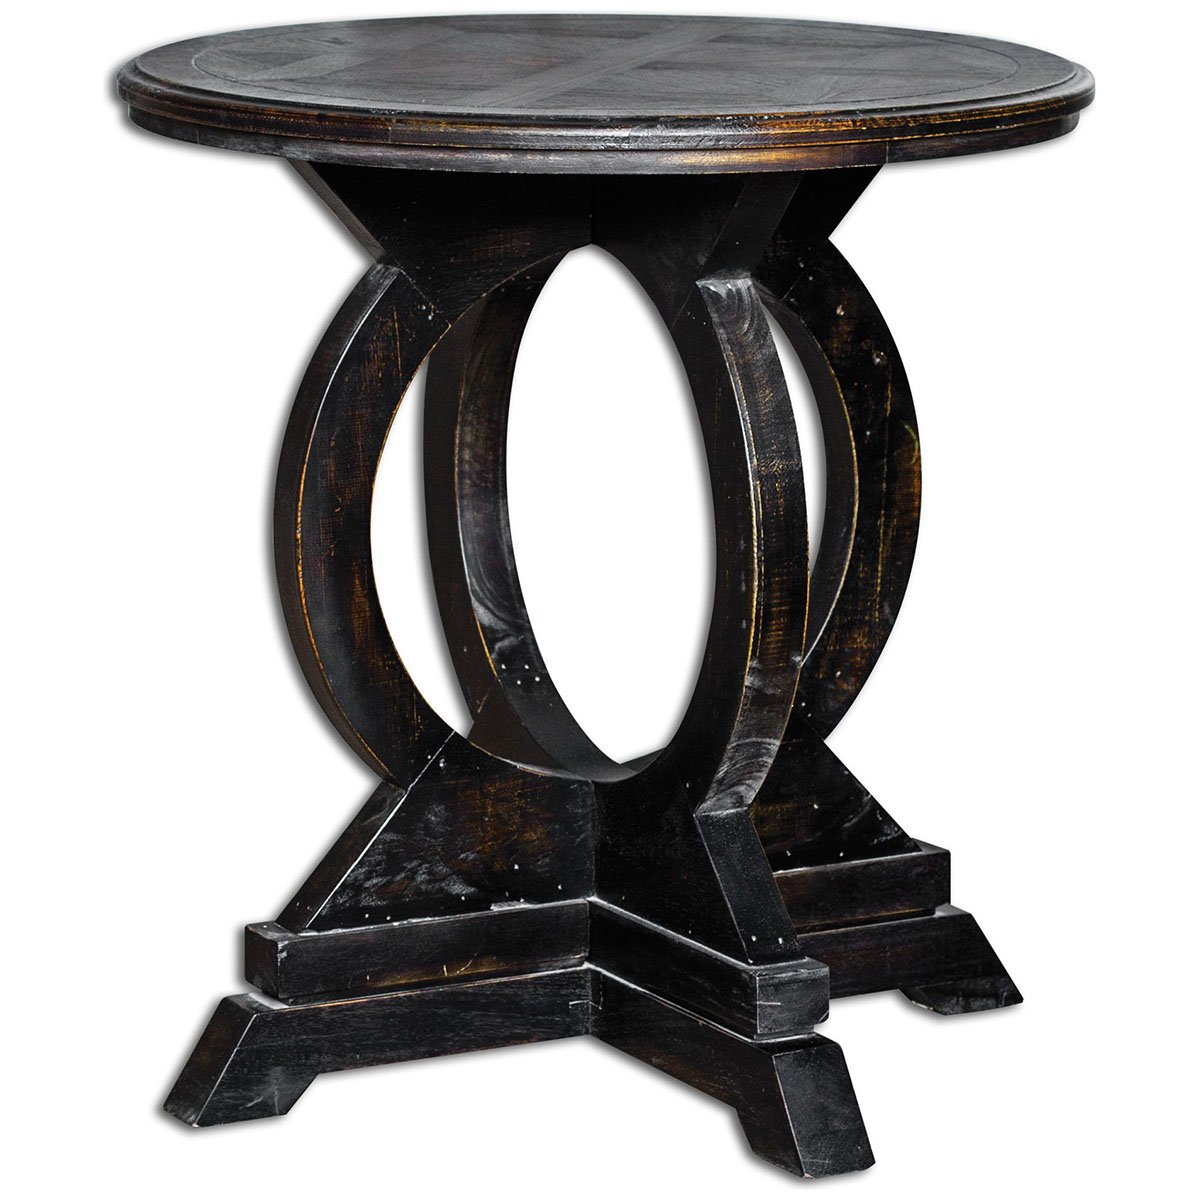 uttermost maiva accent table black kitchen dining piece nesting set tessa furniture stone coffee grohe rainshower small corner tables living room west elm marble plastic garden